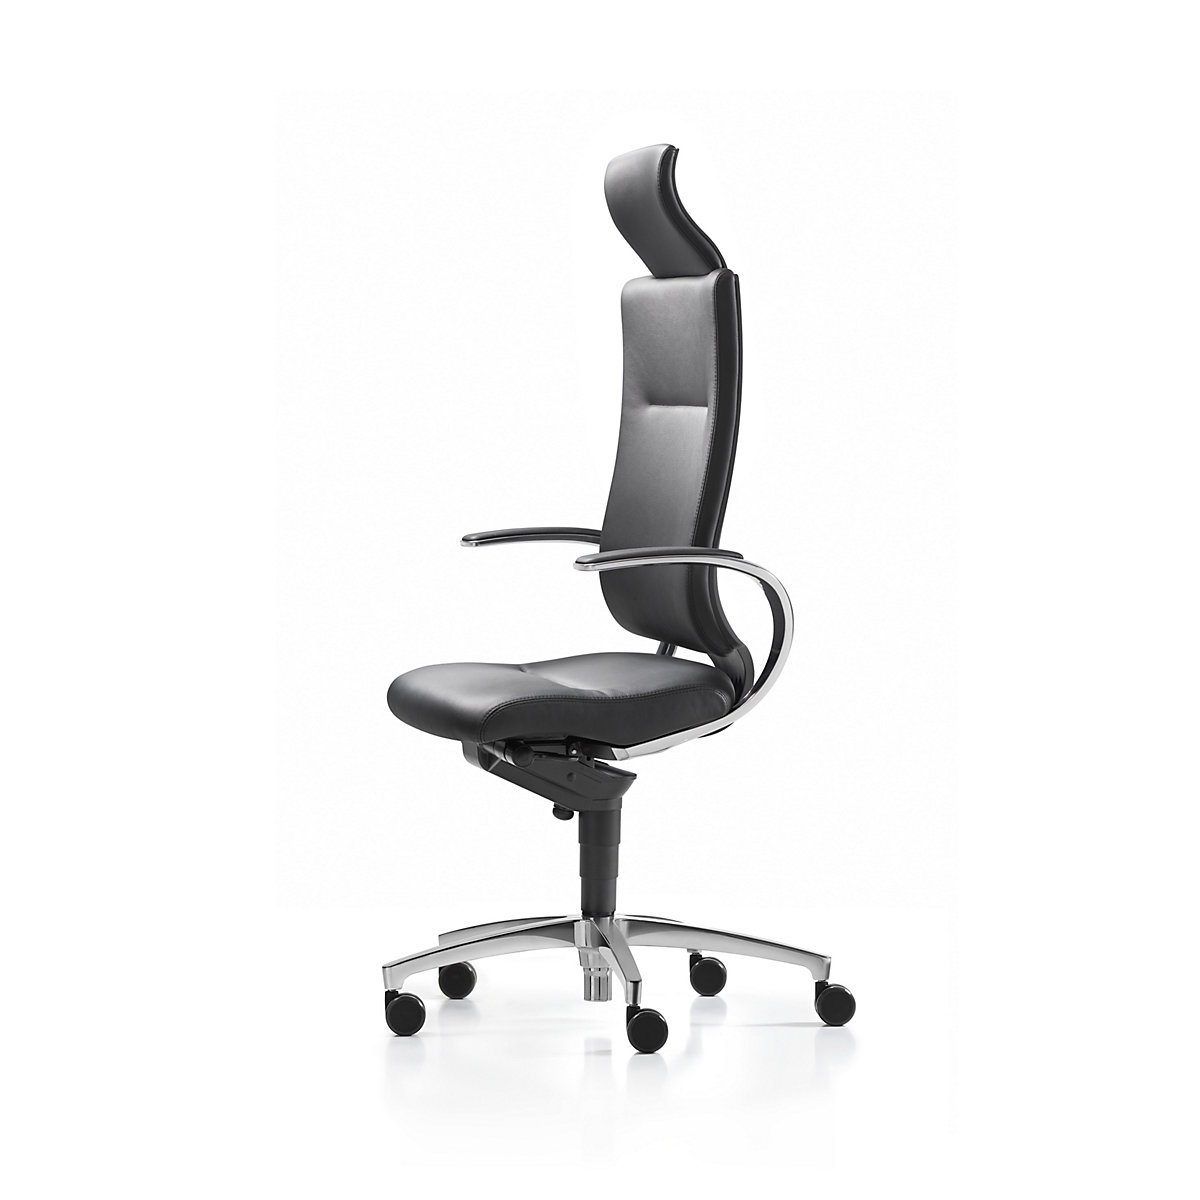 InTouch office swivel chair - Dauphin